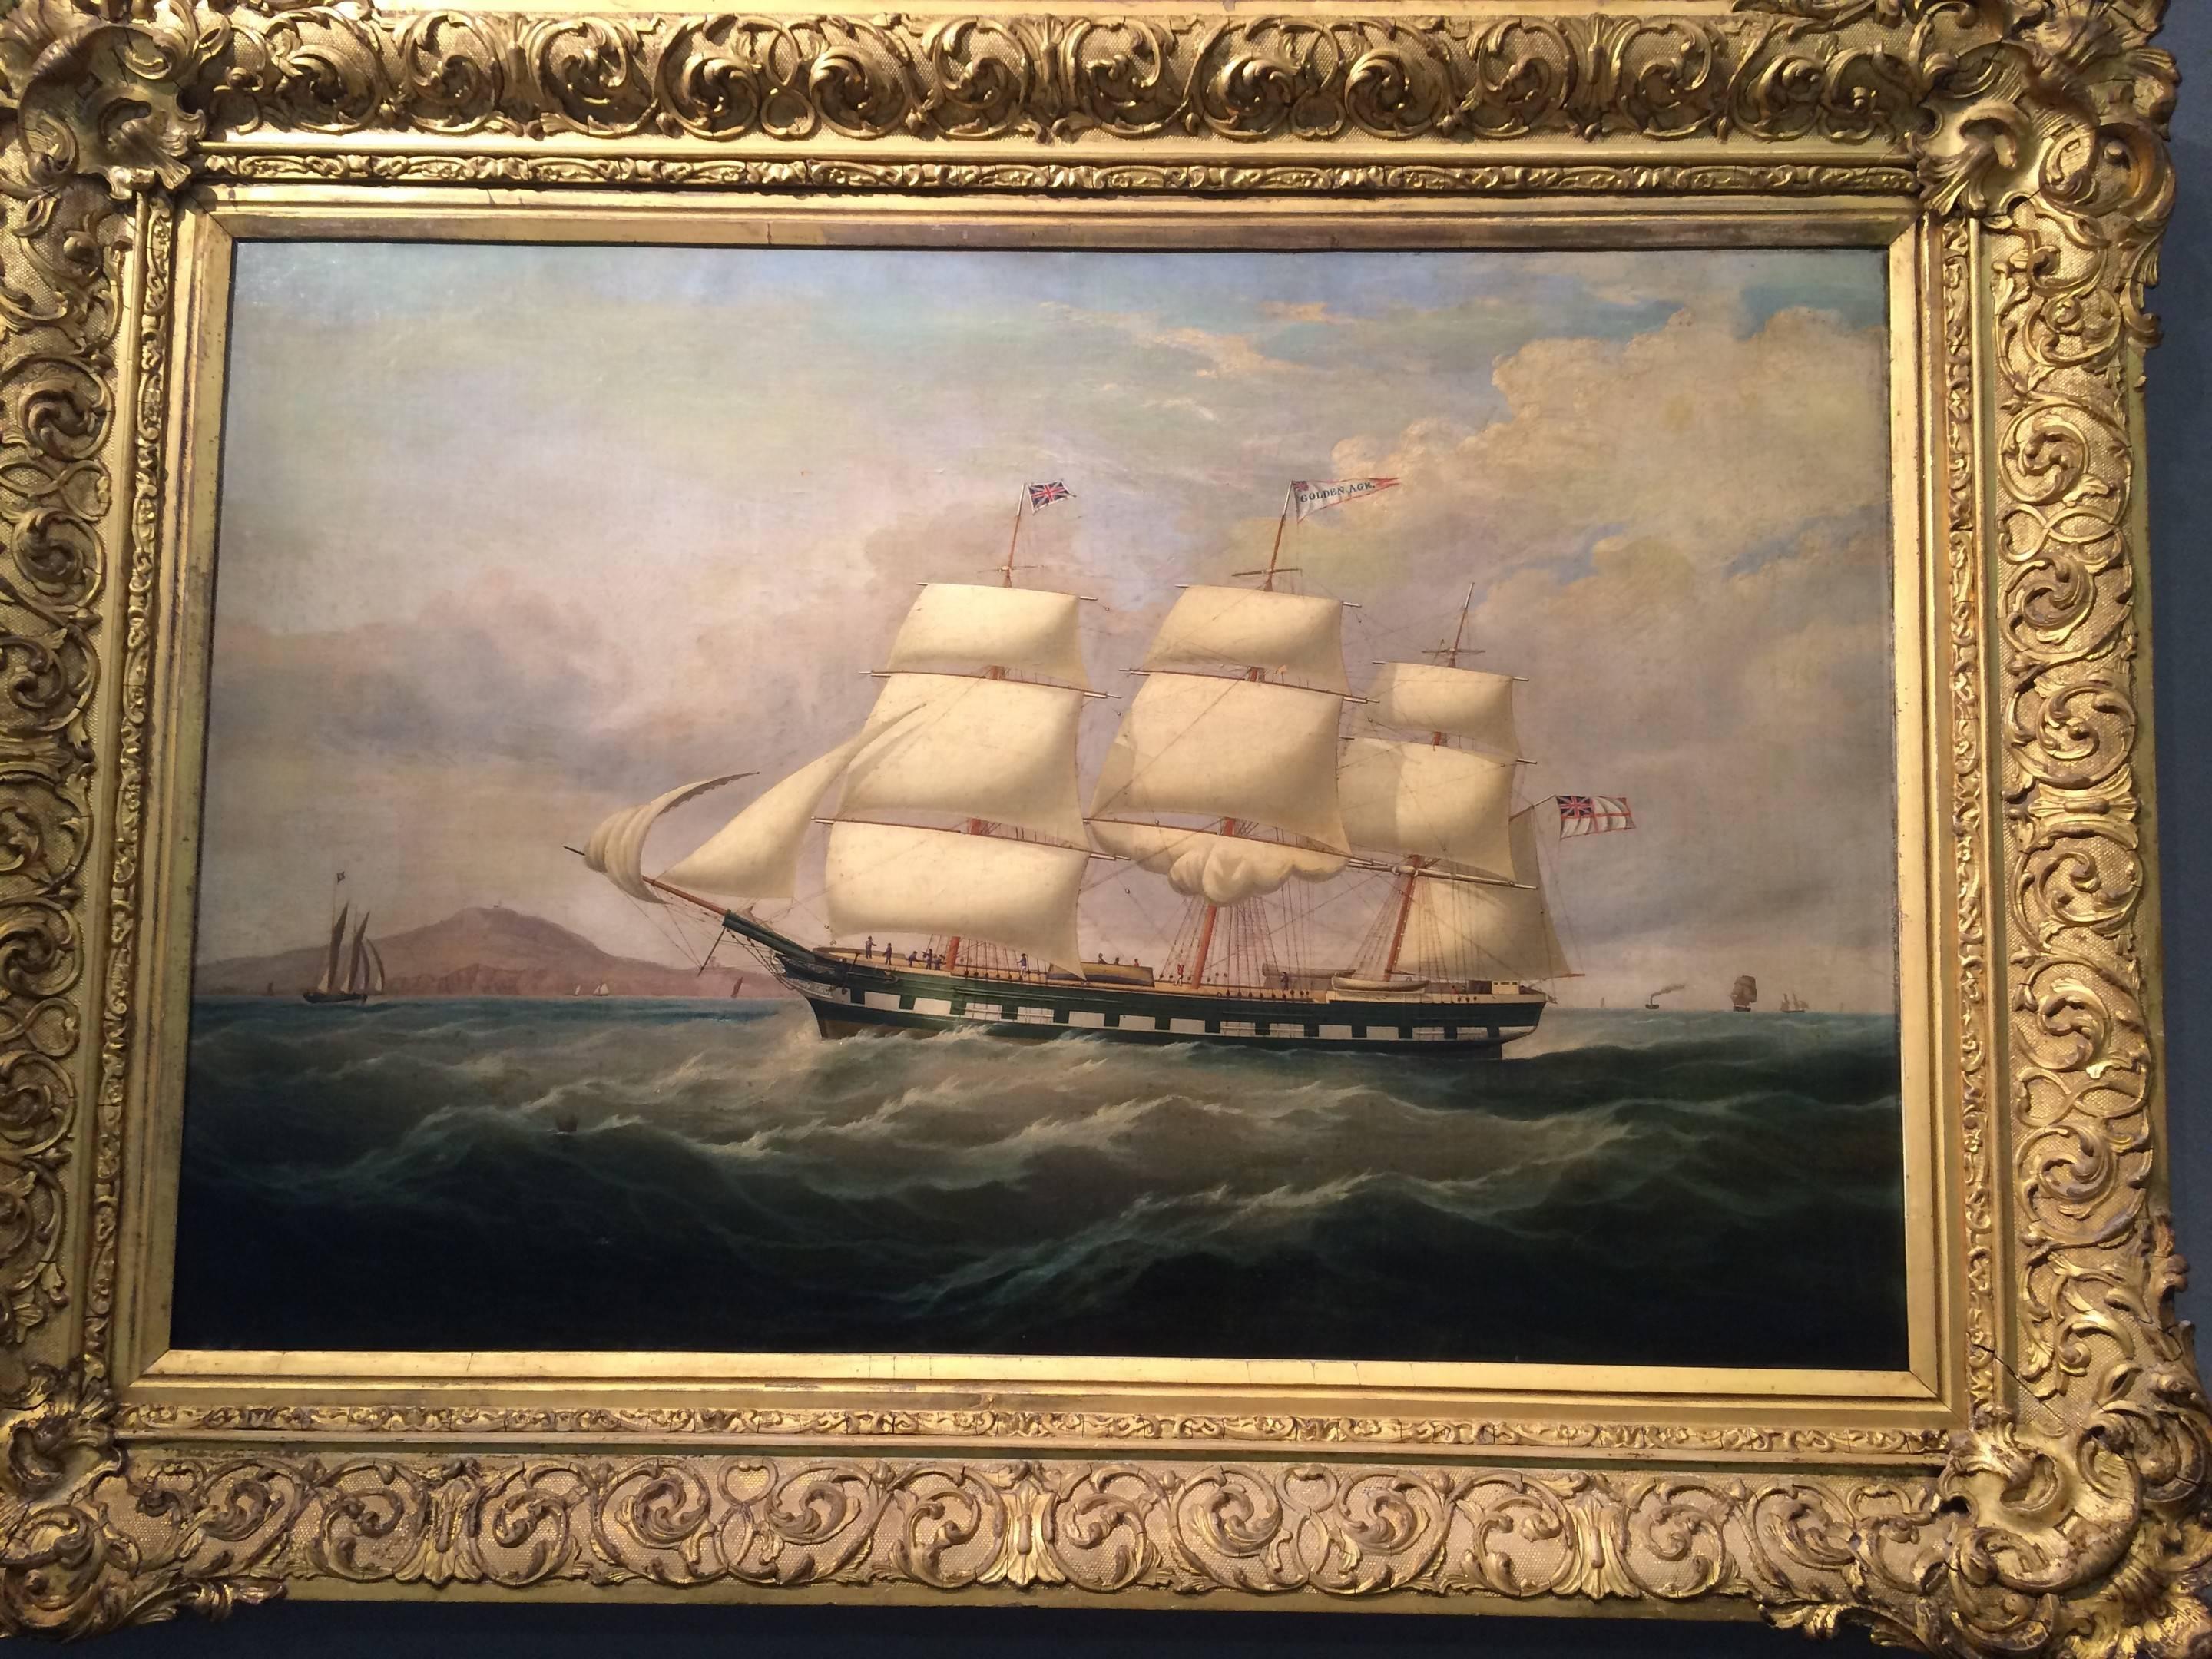 An early 19th century oil on canvas of a three masted ship in the original swept gilt frame, named the golden age on the flag on the middle mast